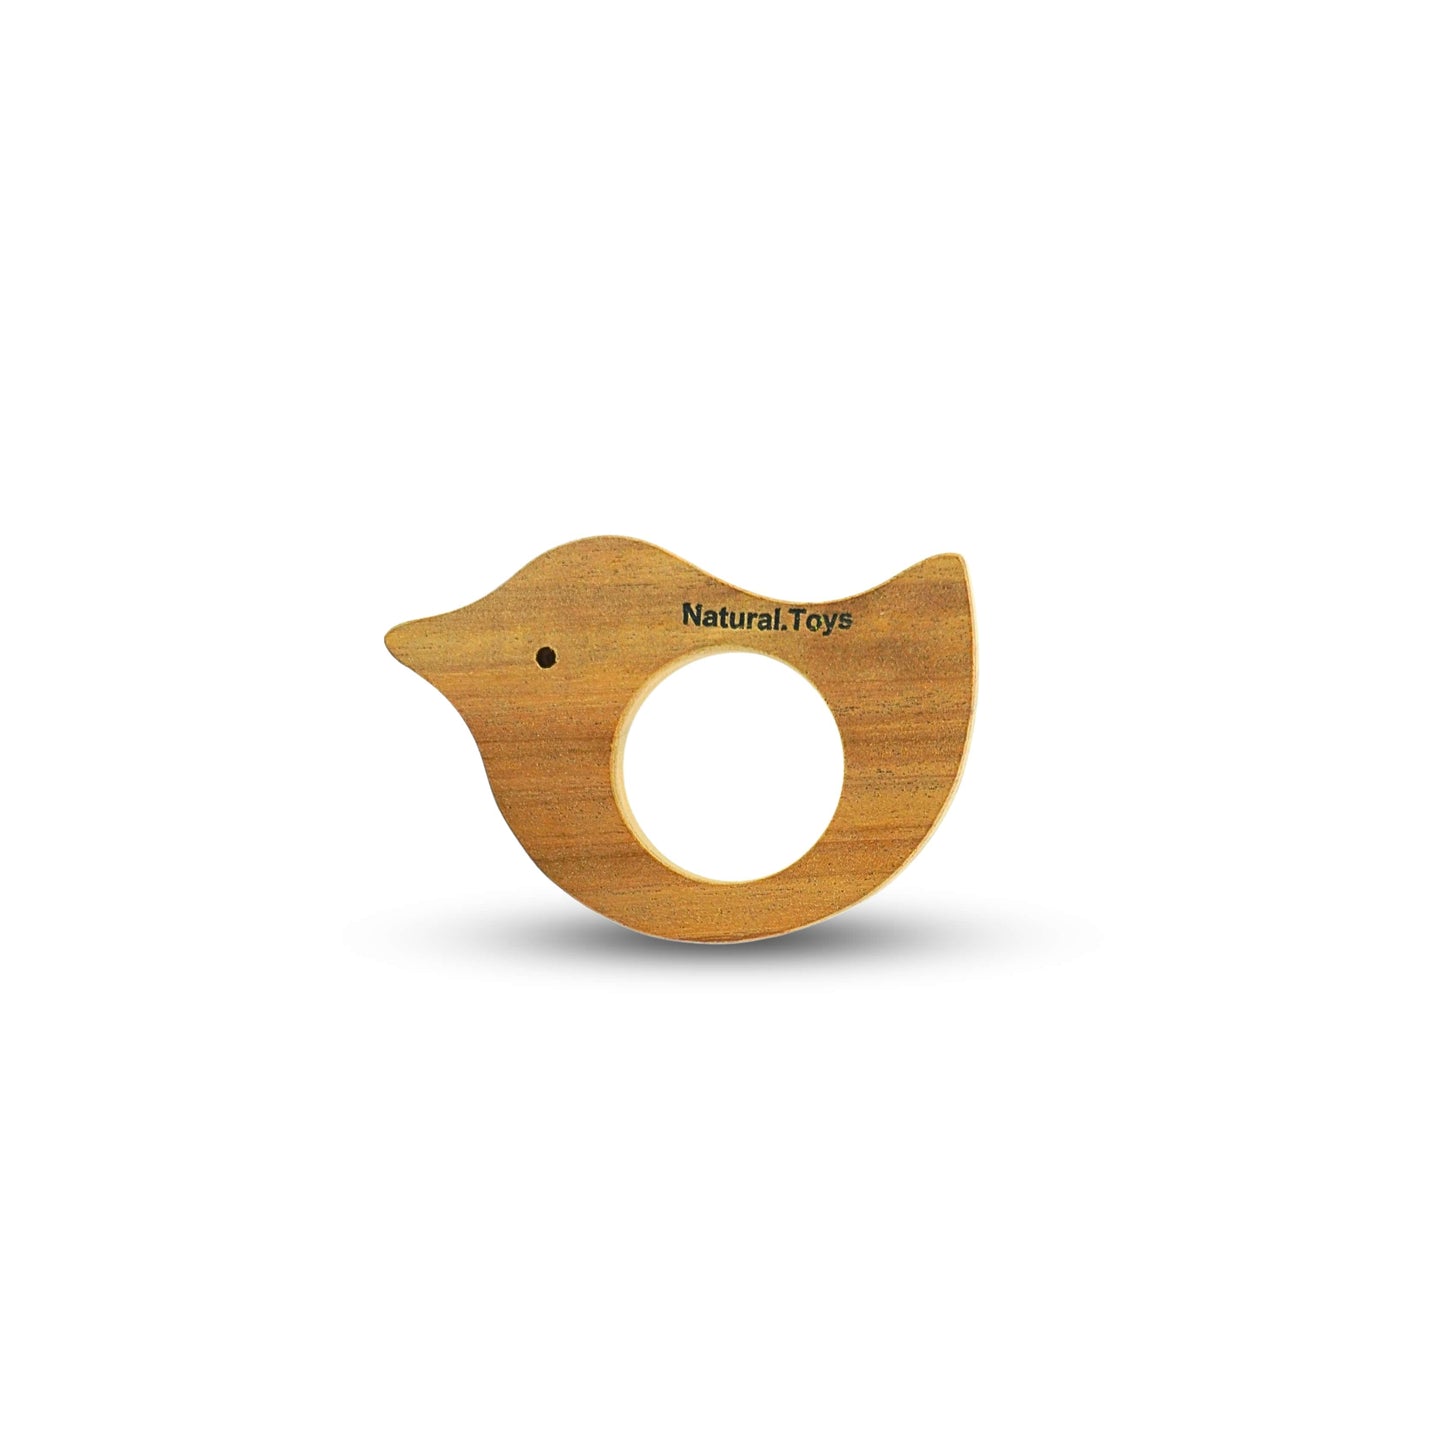 Buy Wooden Teethers Baby Engaging Toy | Natural Toys